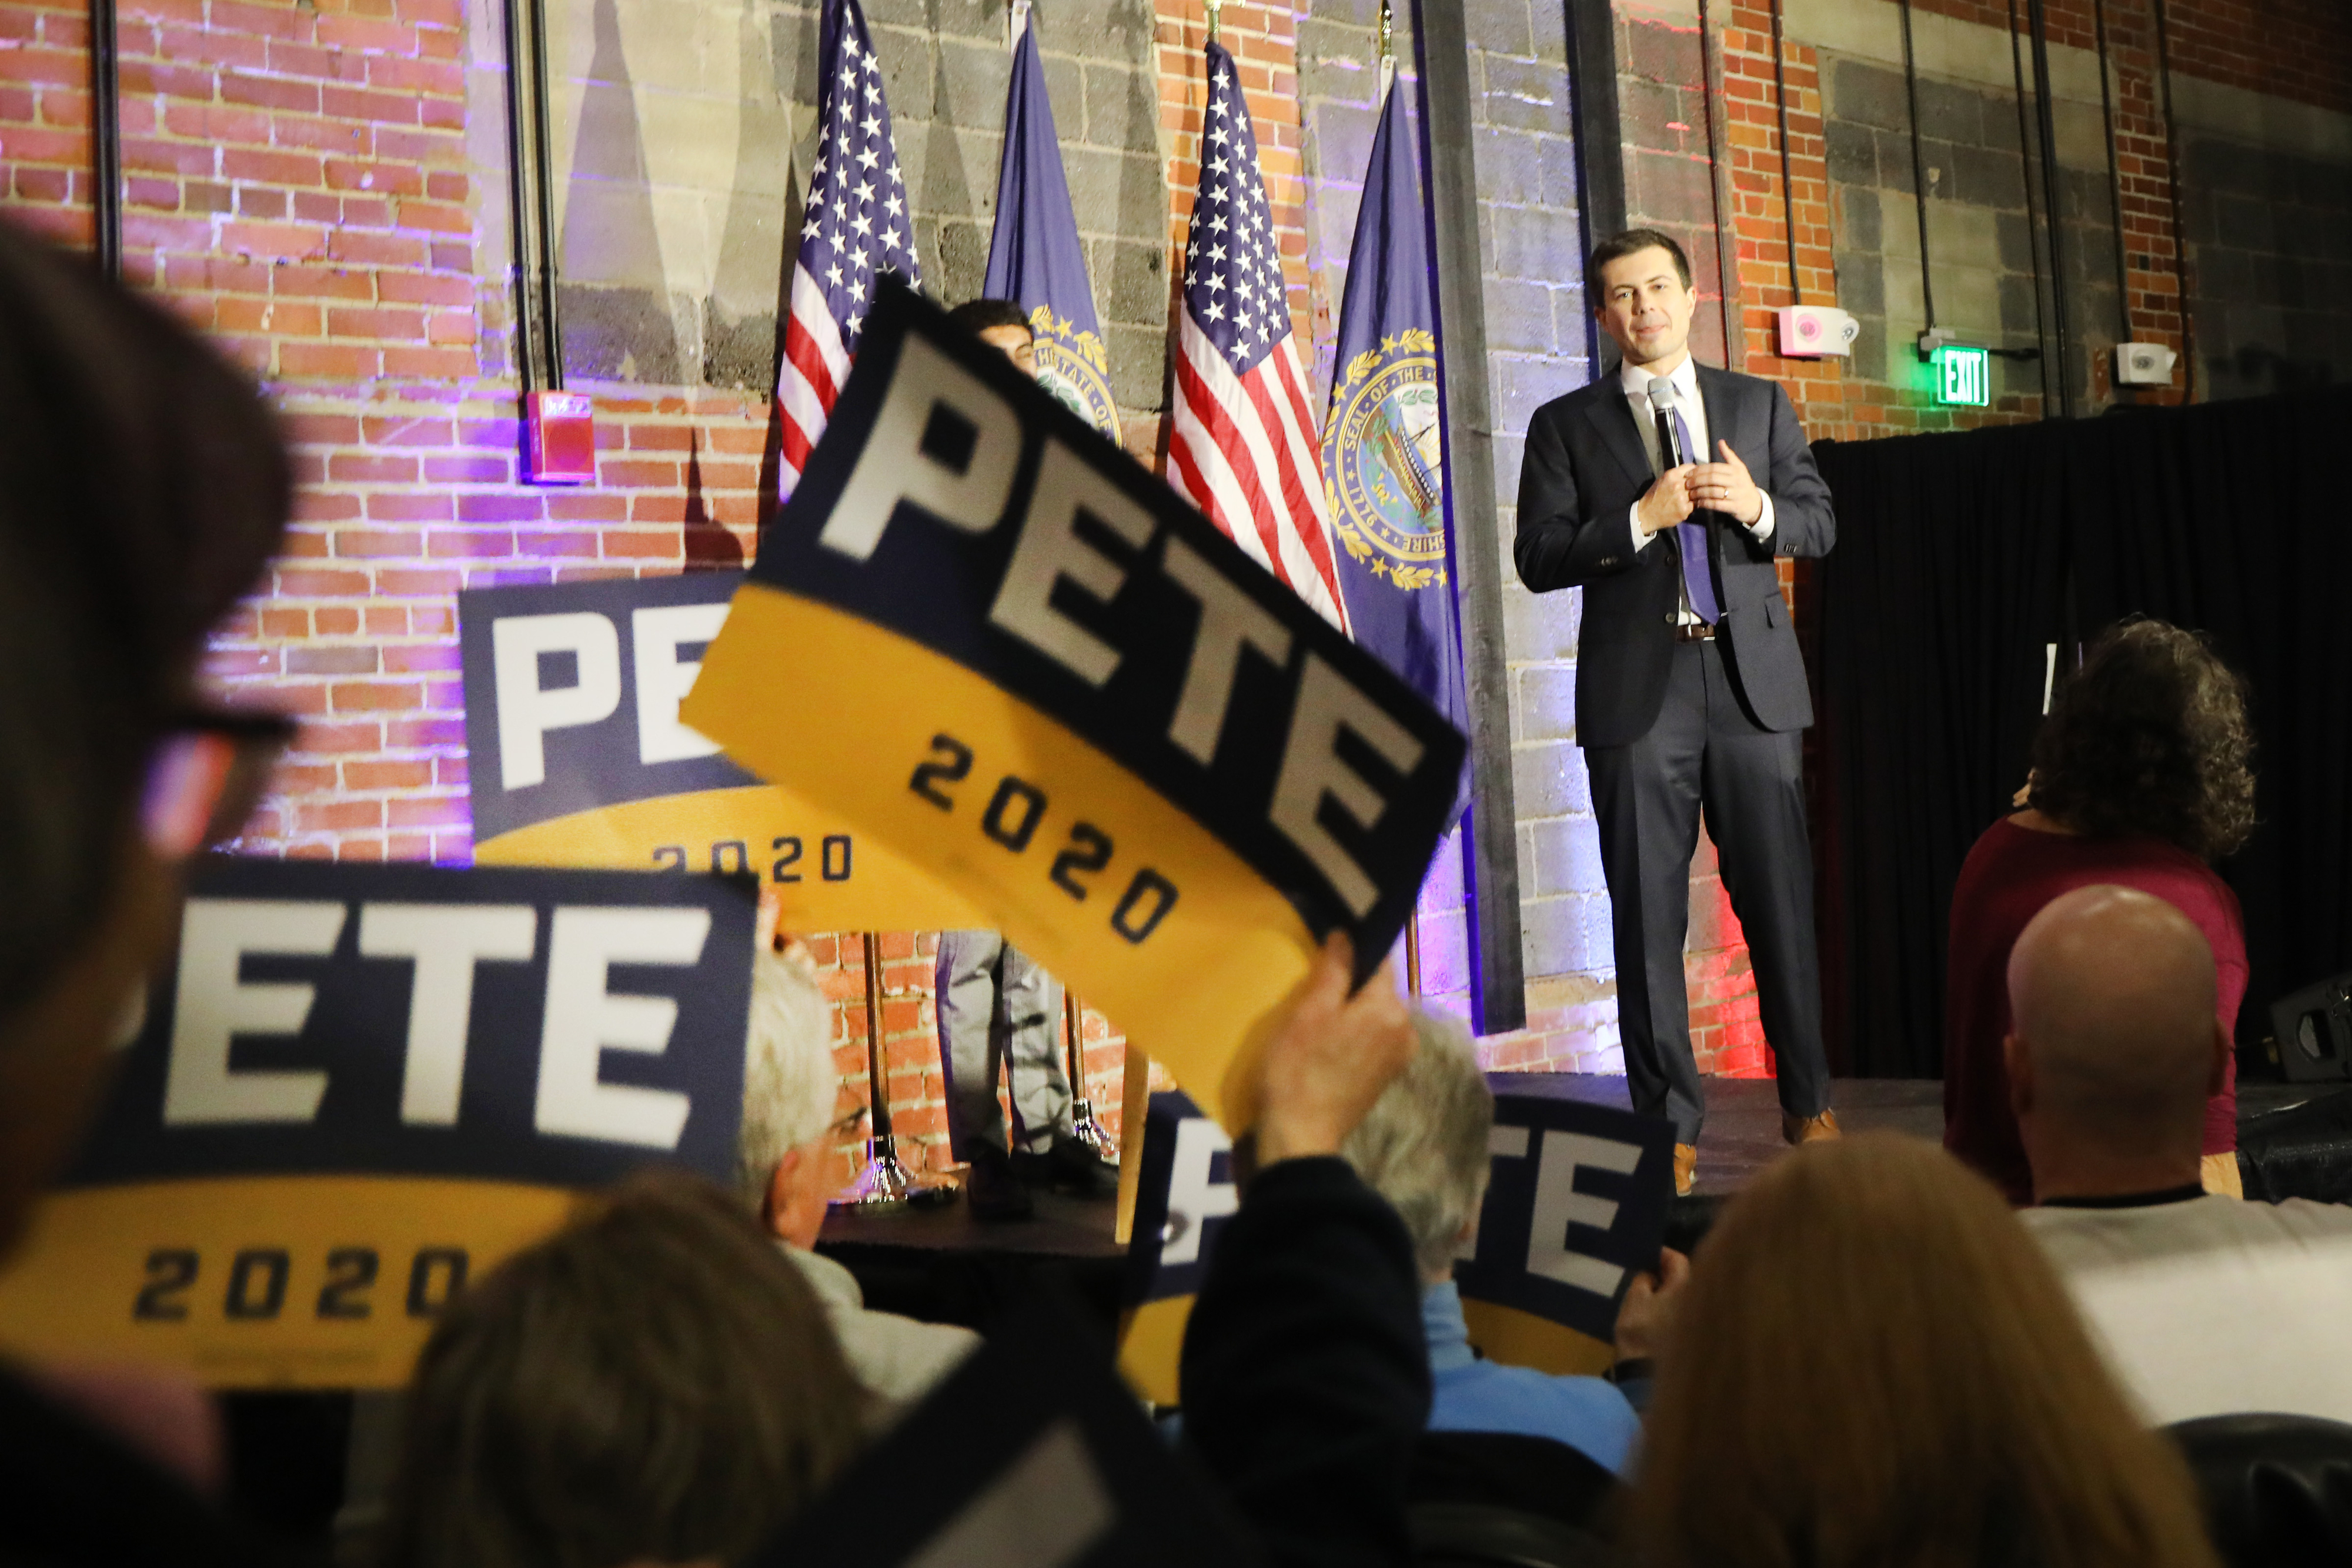 Pete Buttigieg stands speaking at a rally with supporters holding campaign signs